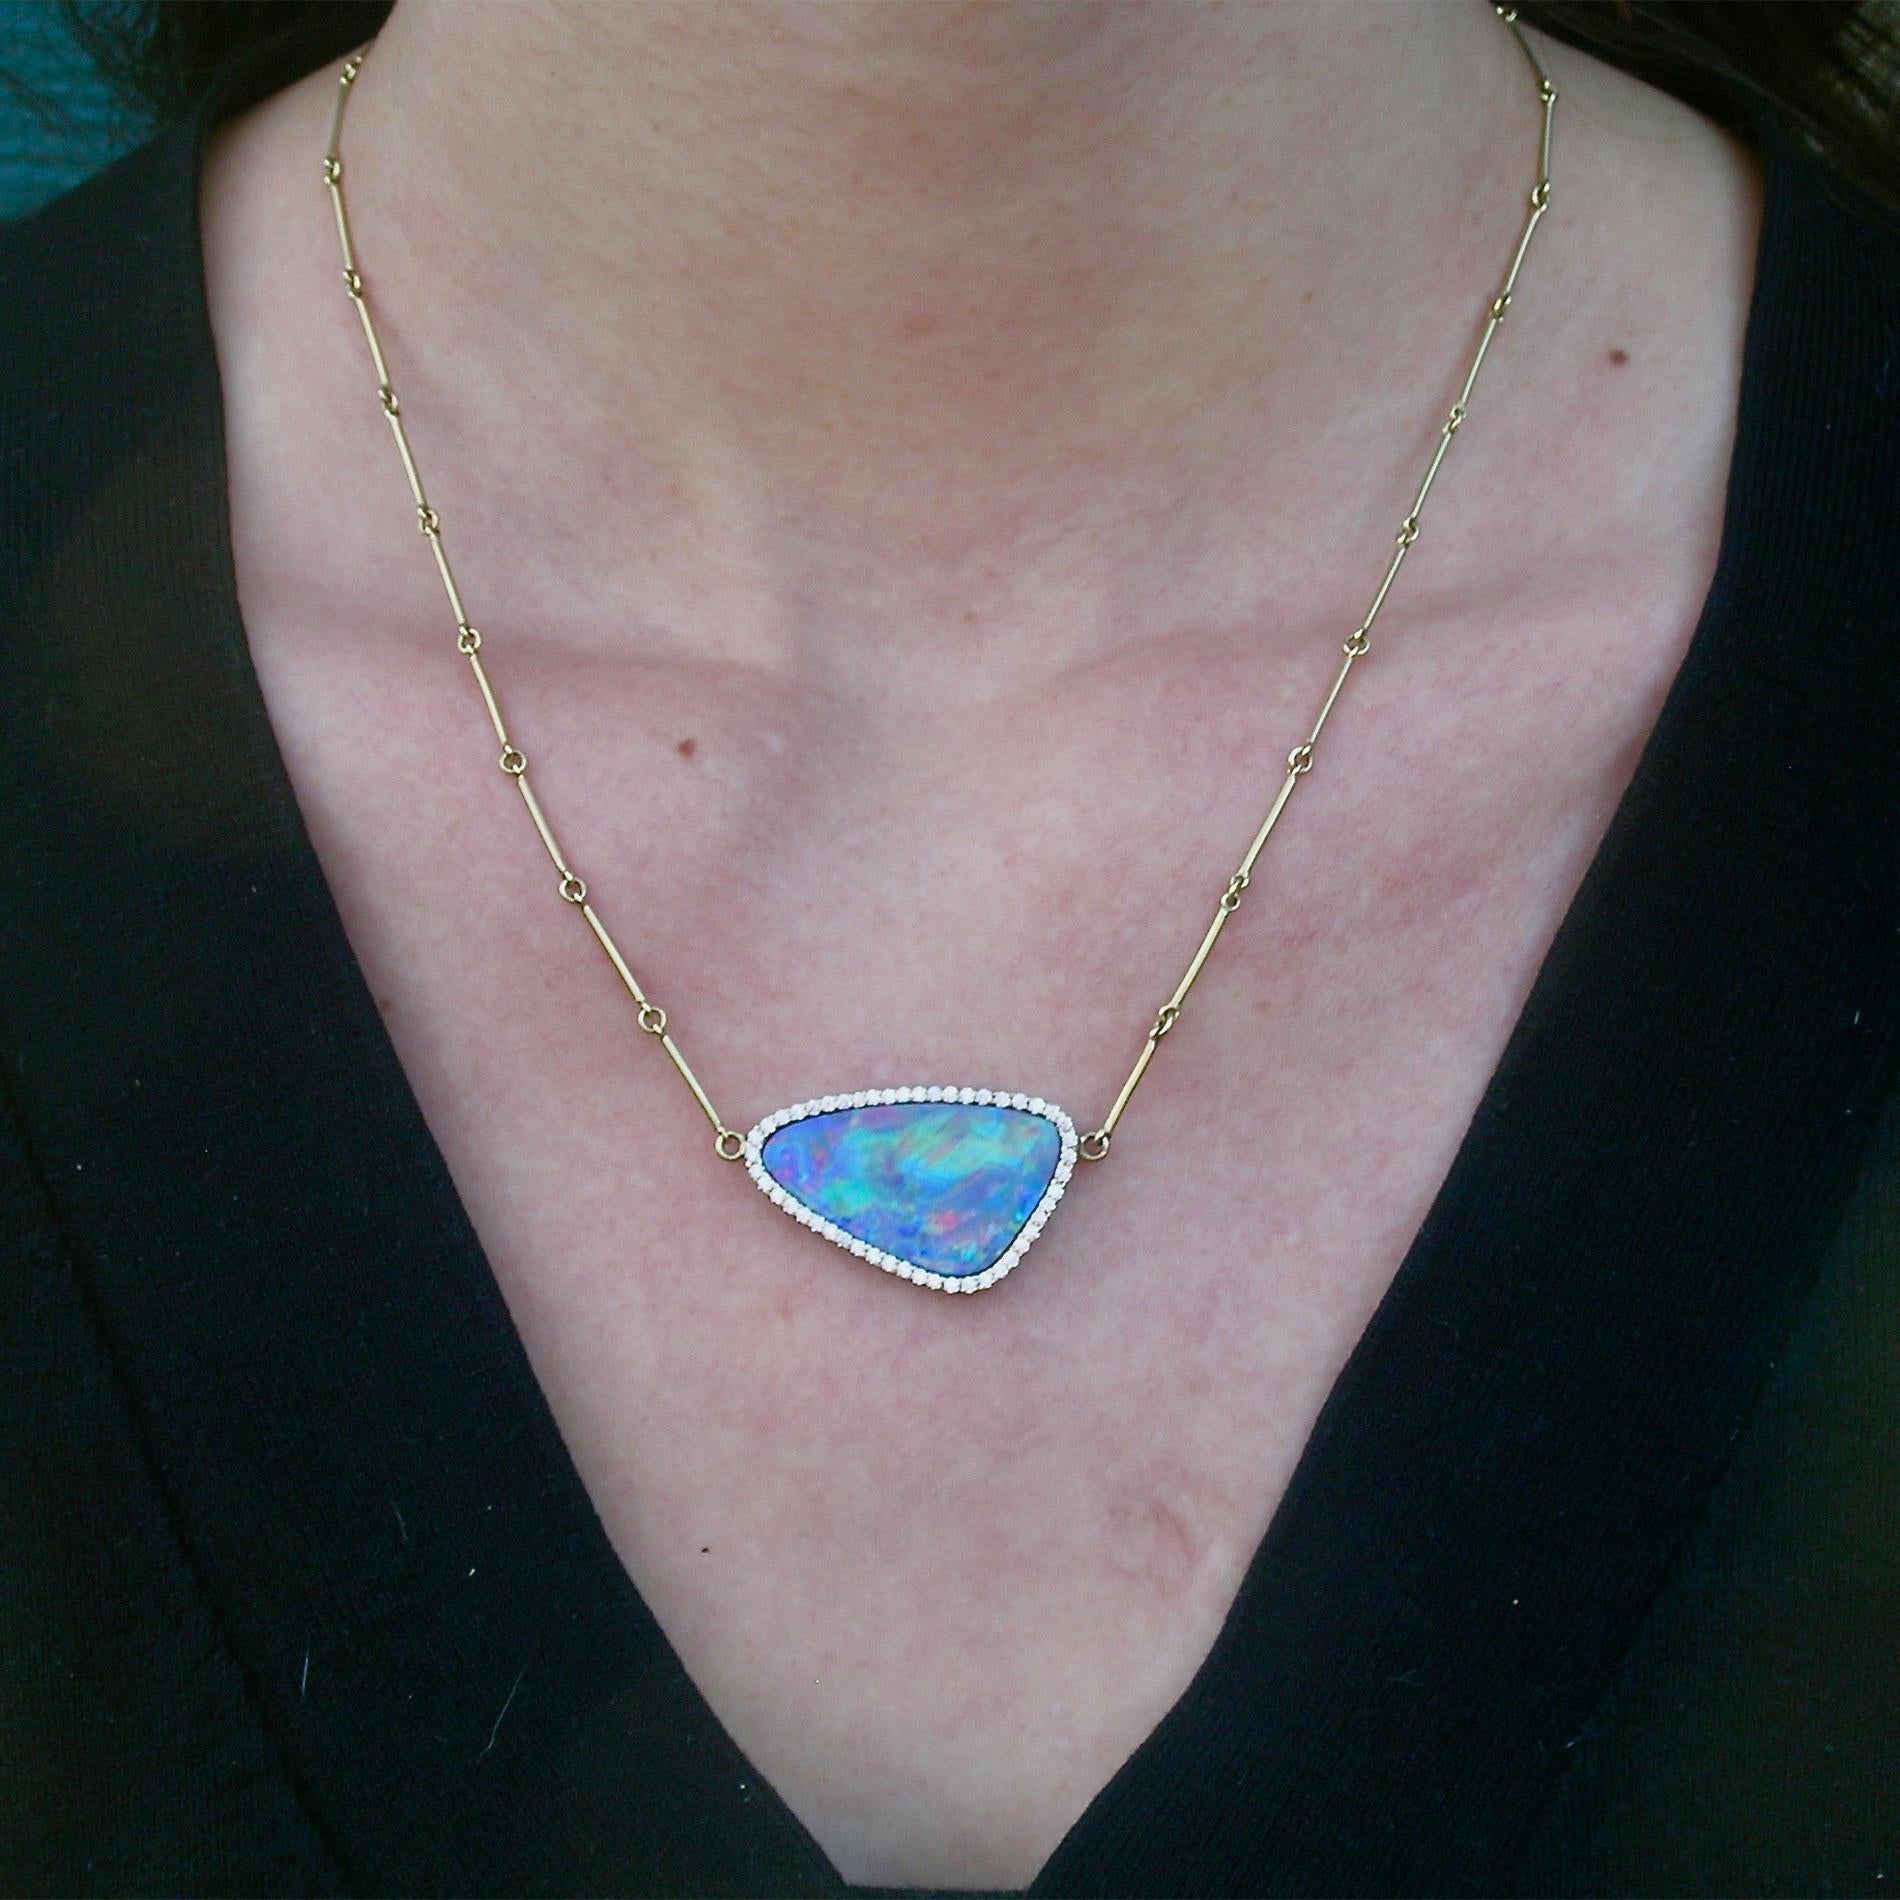 Simple yet elegant, this necklace showcases an incredible Opal from Australia.  The reason it is called a 